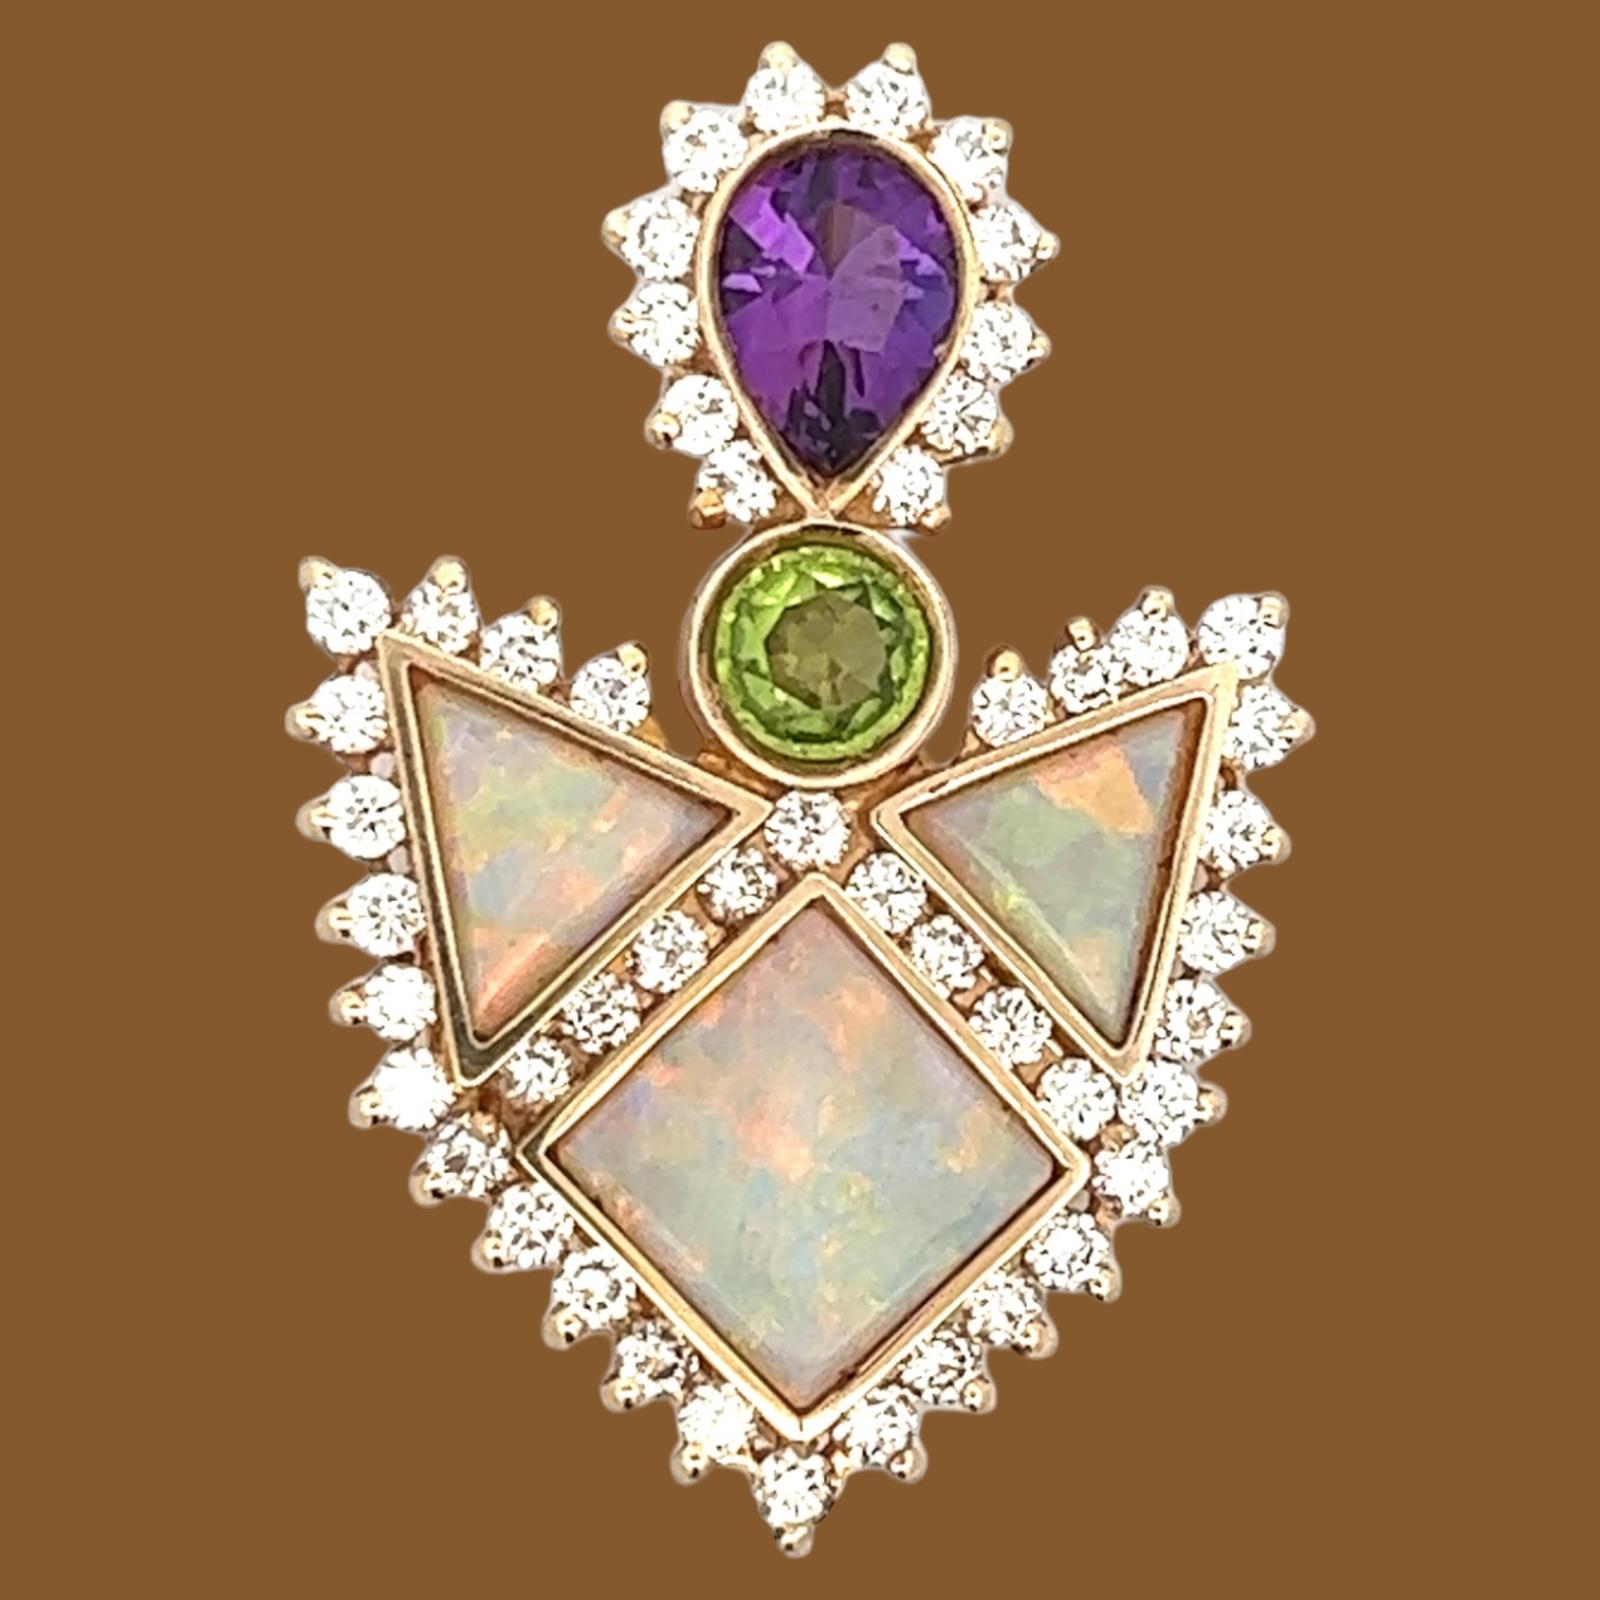 Vibrant diamond and gemstone brooch handcrafted in 14 karat yellow gold. The pin features inlays of opal gemstone, green tourmaline, amethyst, and round brilliant cut diamonds. The diamonds weigh approximately 2.50 carat total weight and are graded